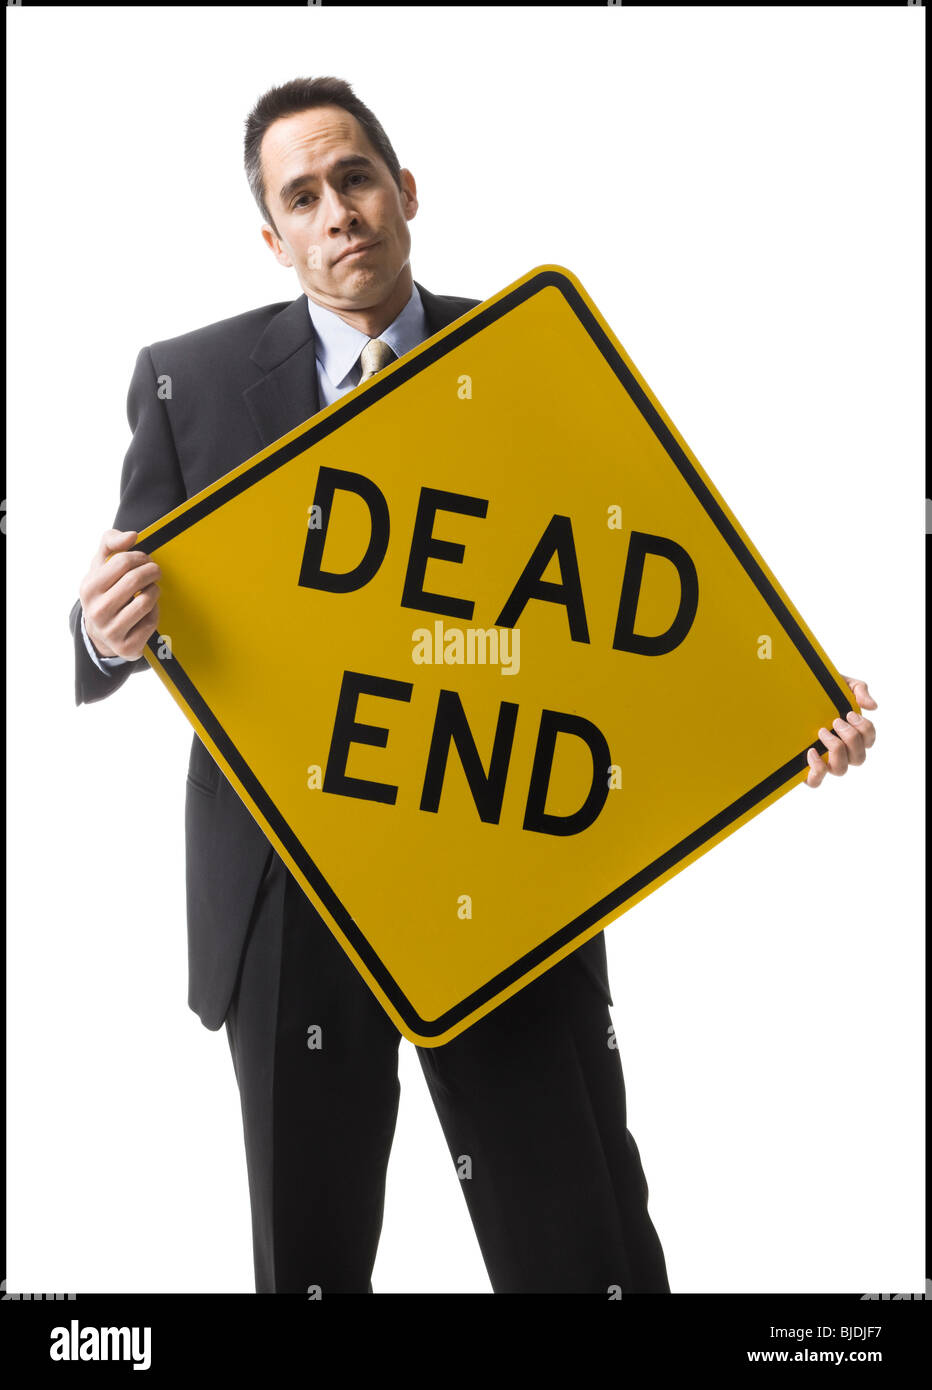 person holding a dead end sign Stock Photo